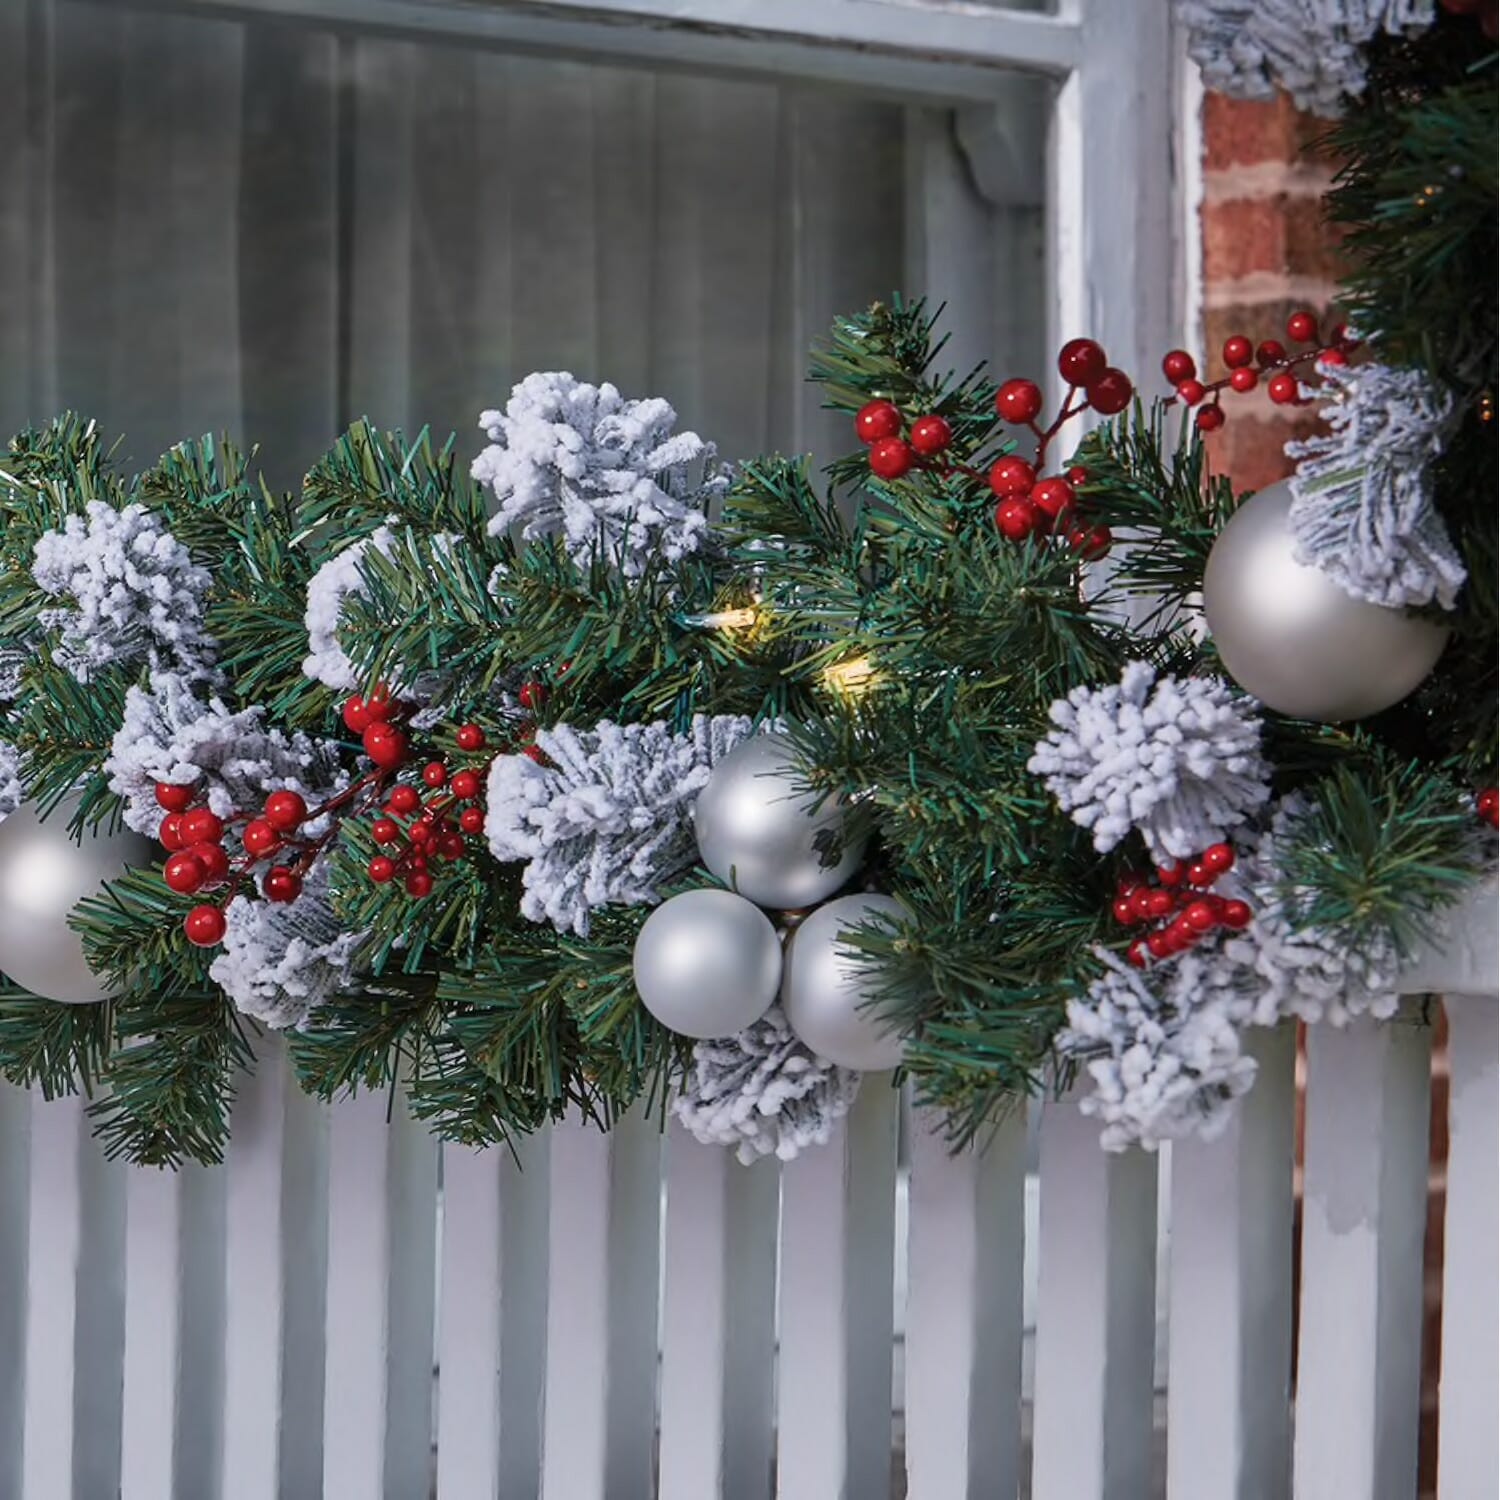 A lit garland on a porch railing, with flocked and green pine, white ball ornaments, and red berries.